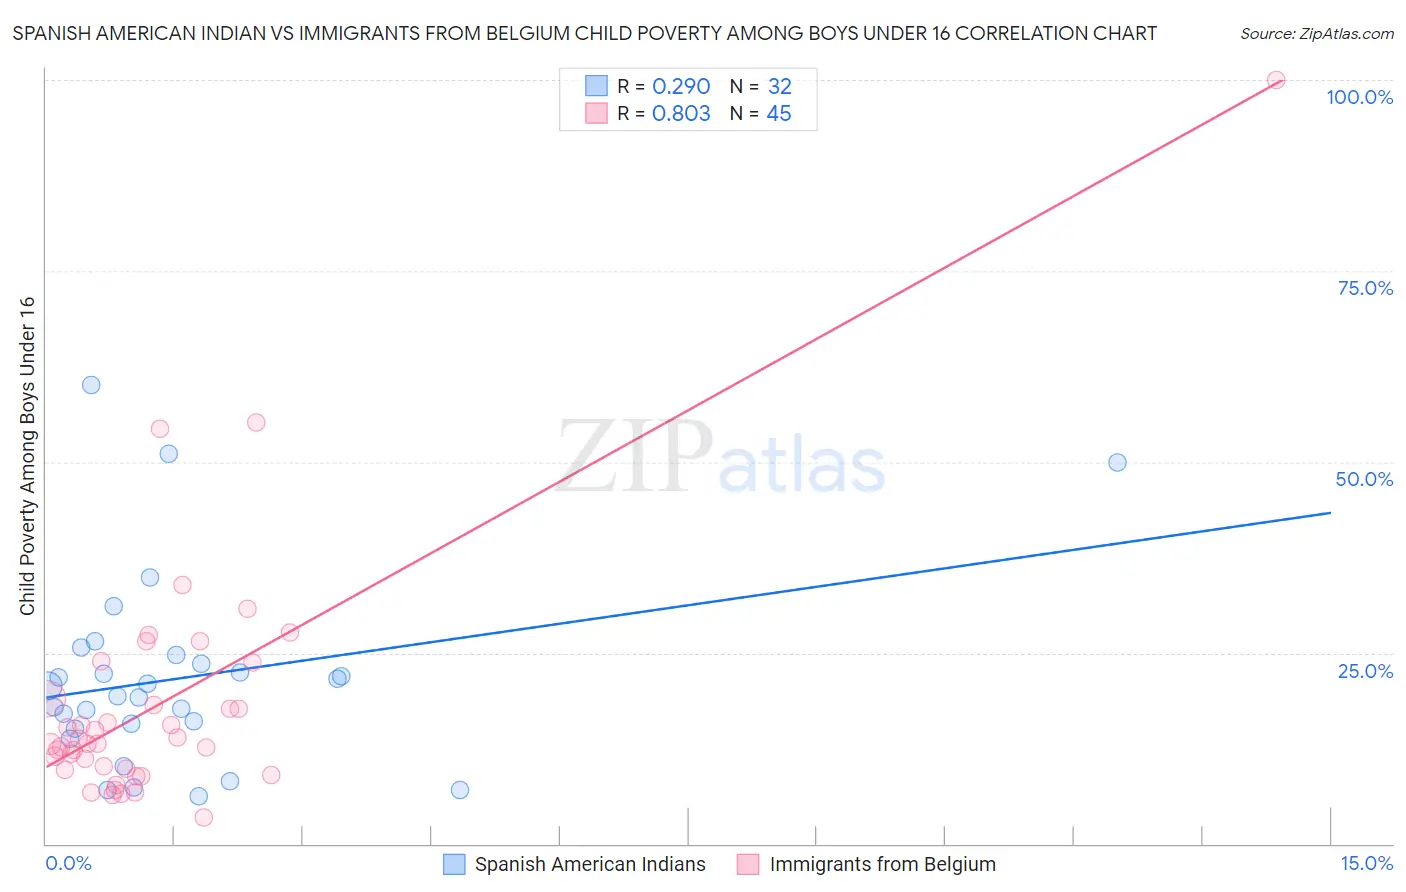 Spanish American Indian vs Immigrants from Belgium Child Poverty Among Boys Under 16